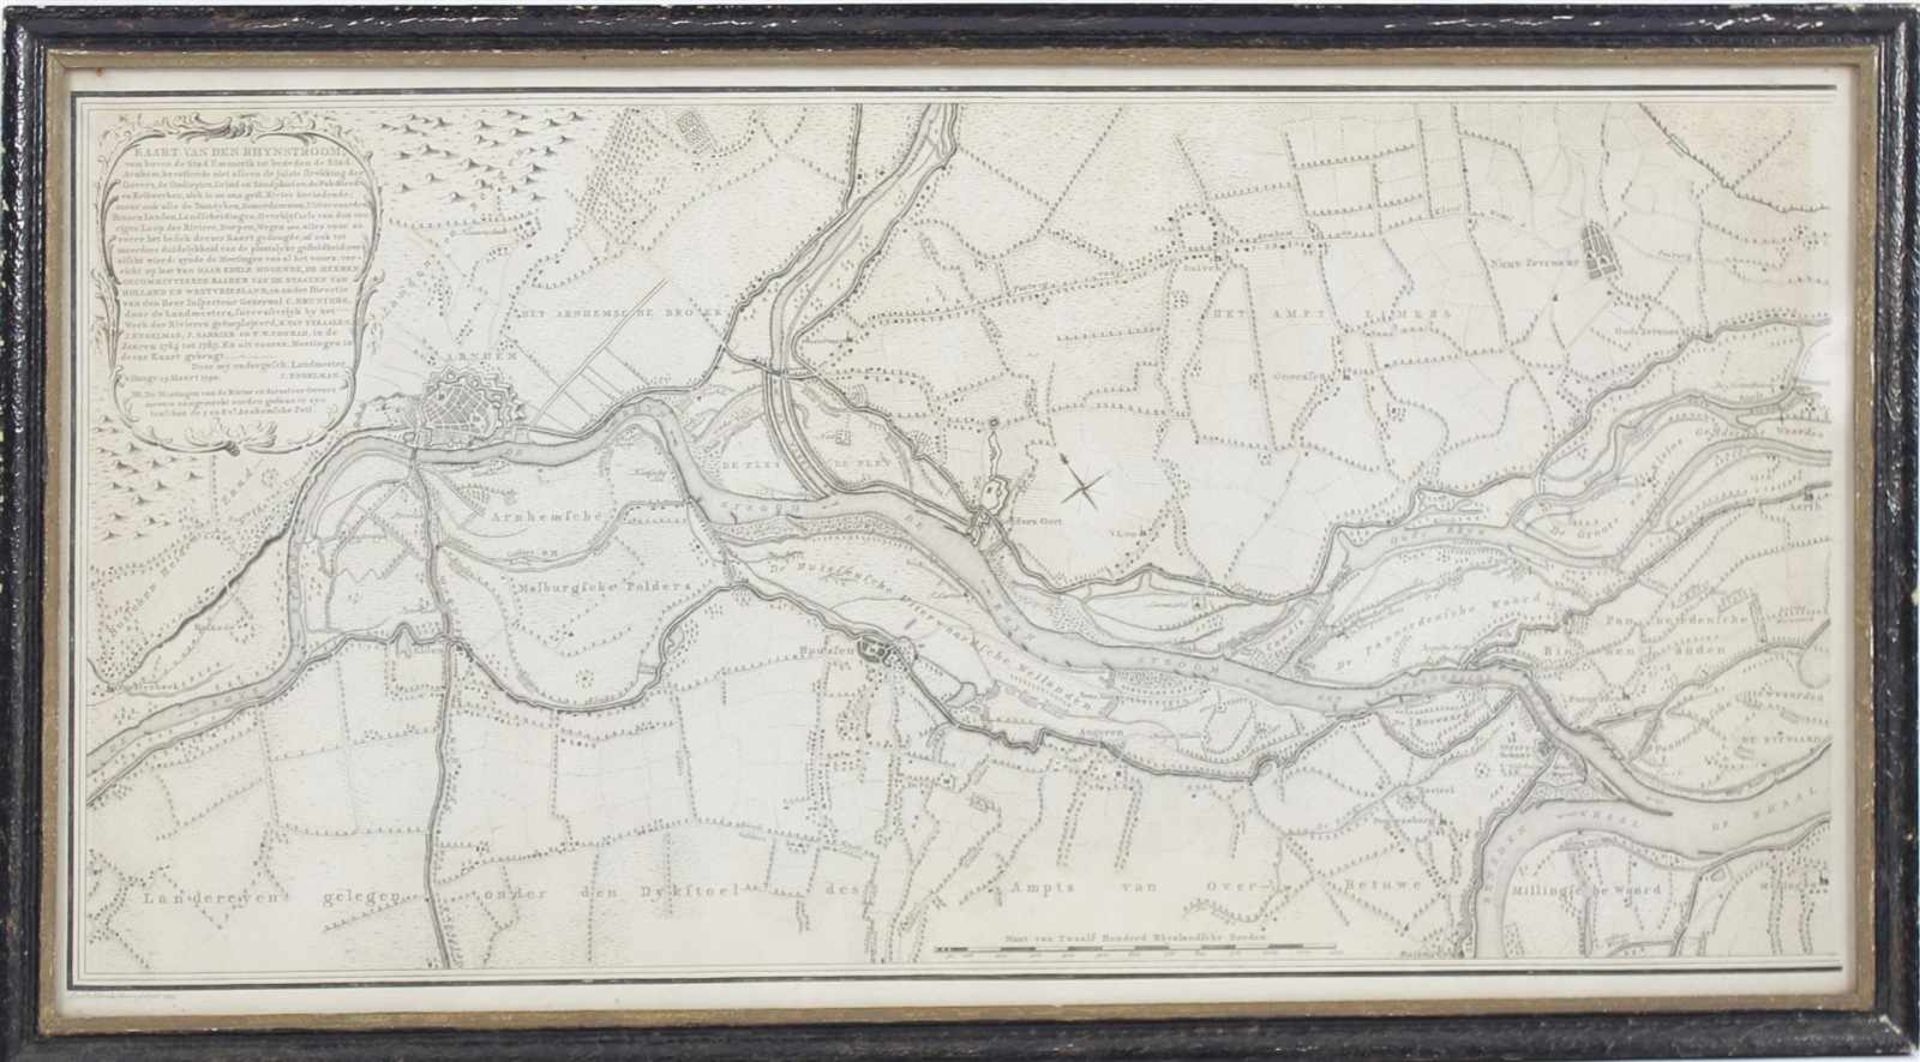 Old topographic map of the Rhynstroom by Leon Schenk Jansz, J Engelman March 29, 1790, 33x65 cm